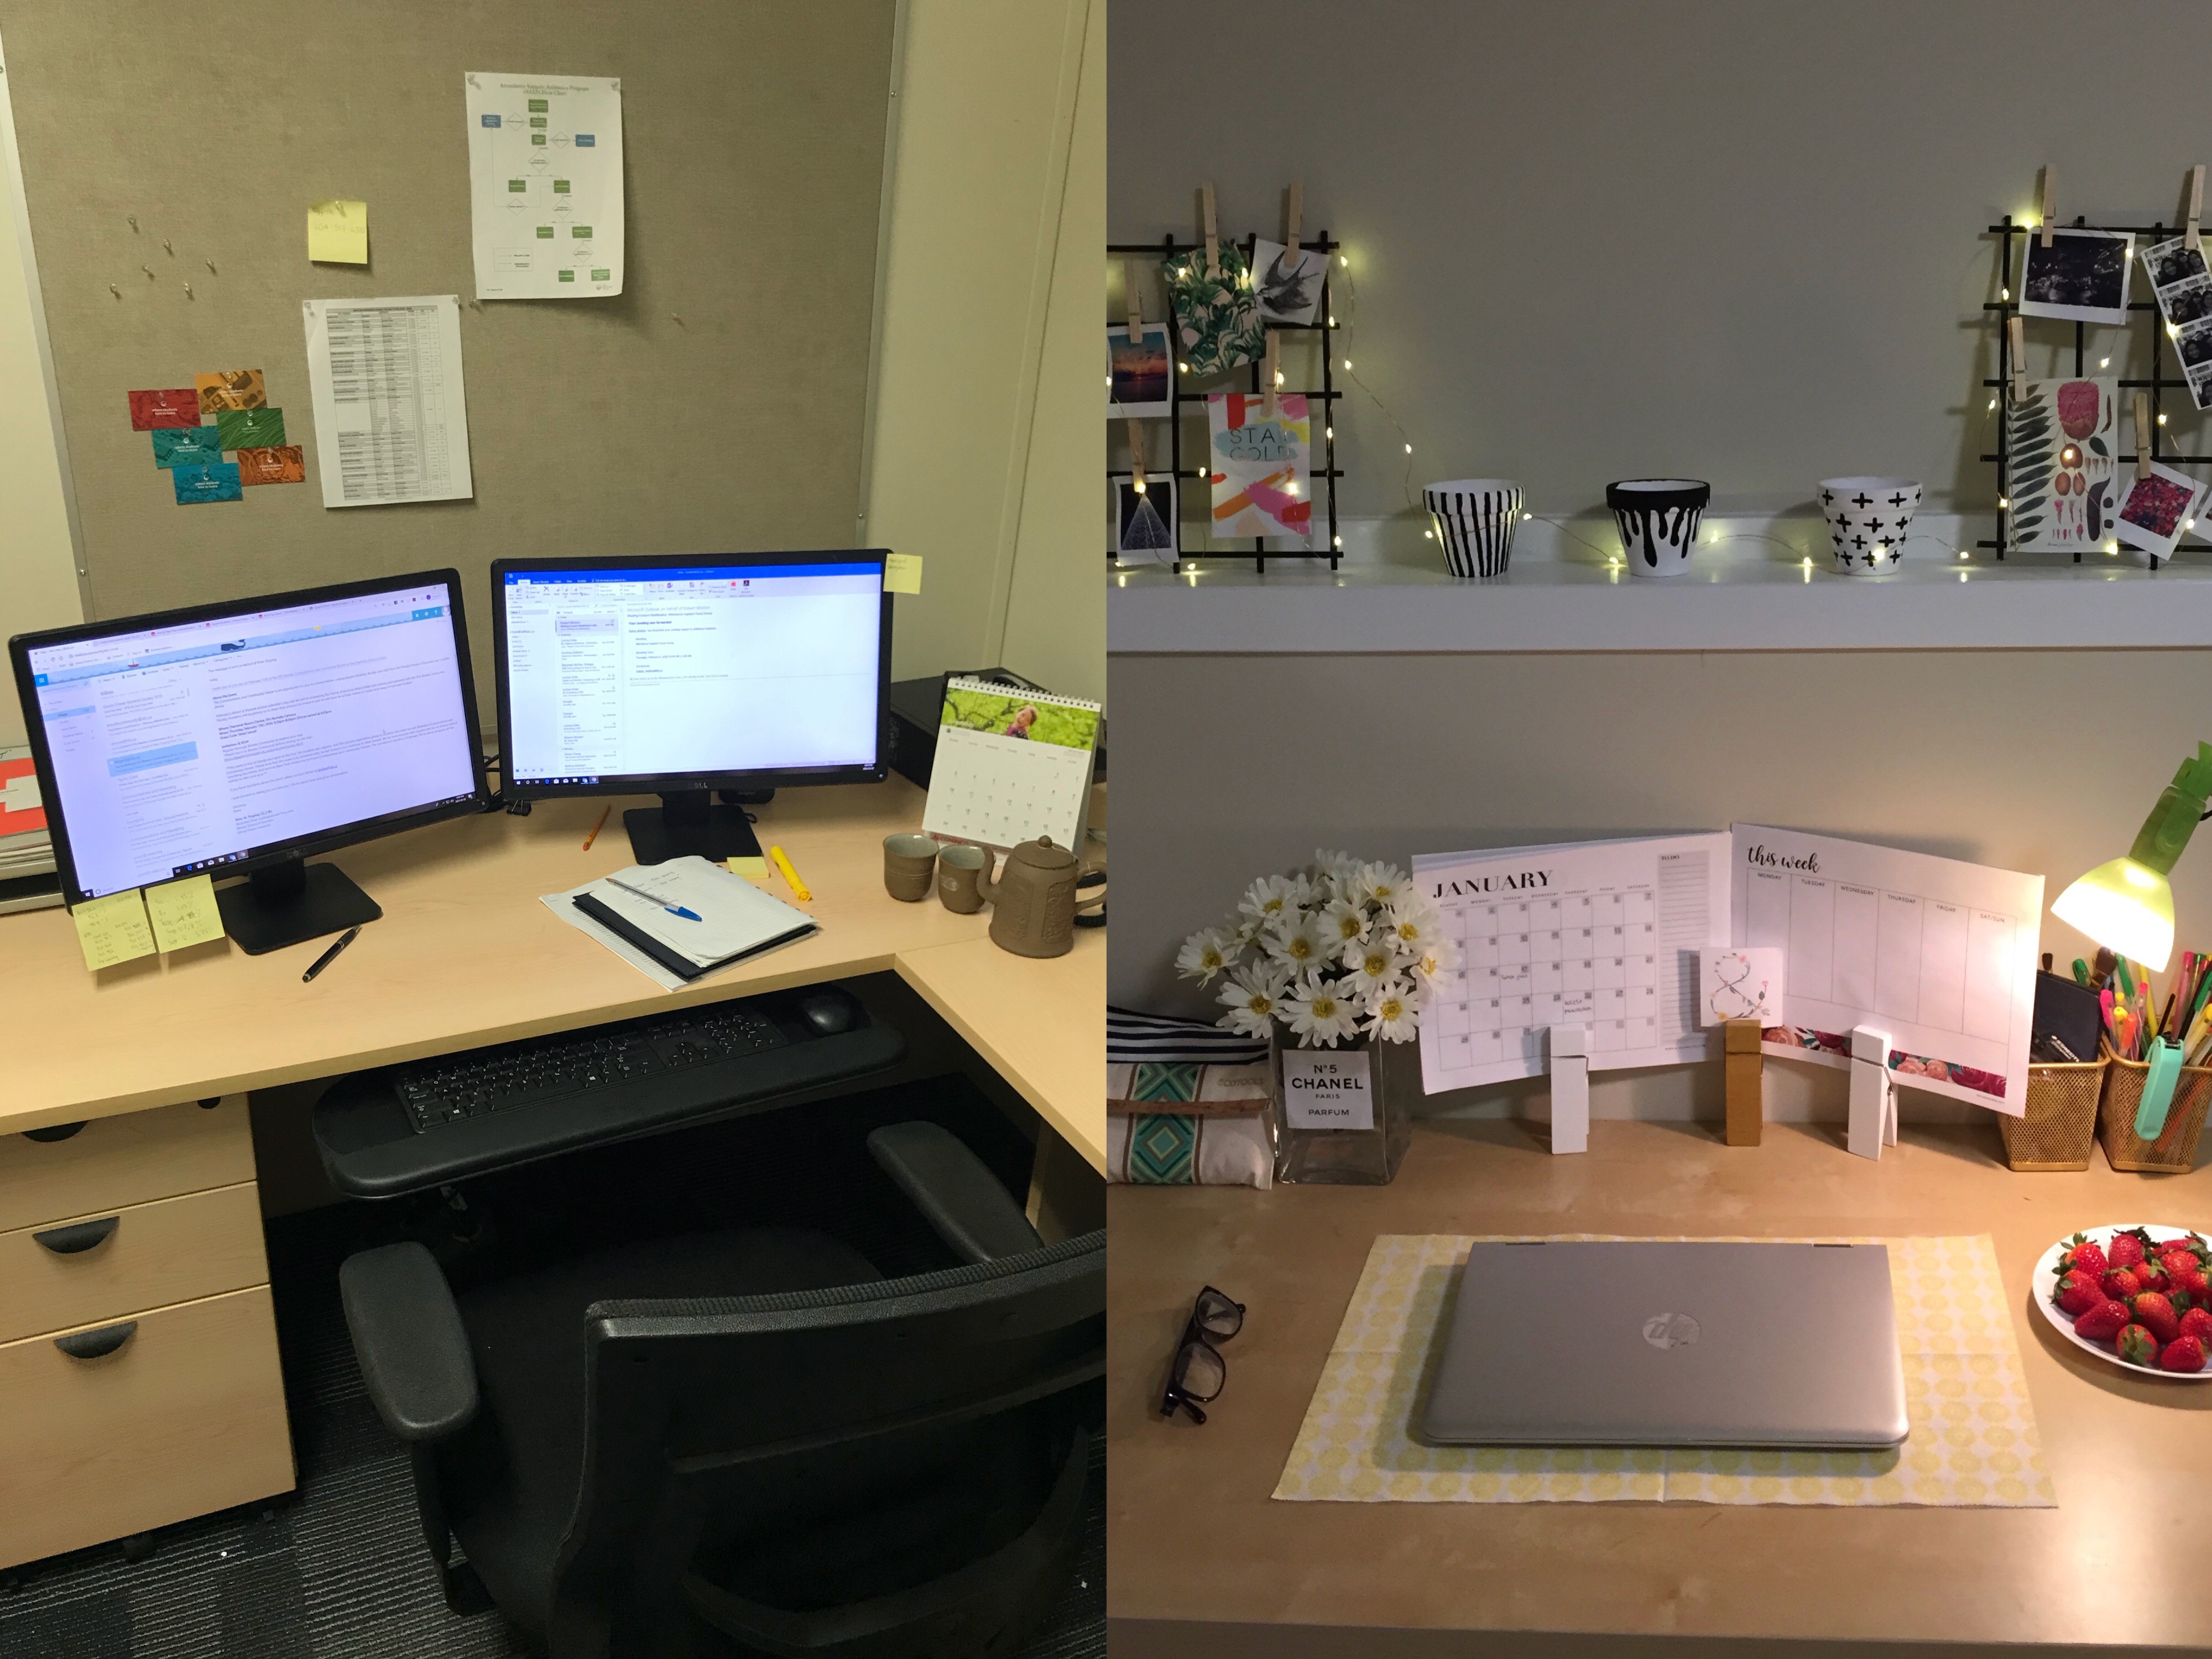 A side-by-side comparison of Linh's workspace at the office vs. her workspace at home. Her office work space has two monitors and other desktop stationary; while her home work space has one laptop on the computer and other small decorations such as fairy lights and flowers